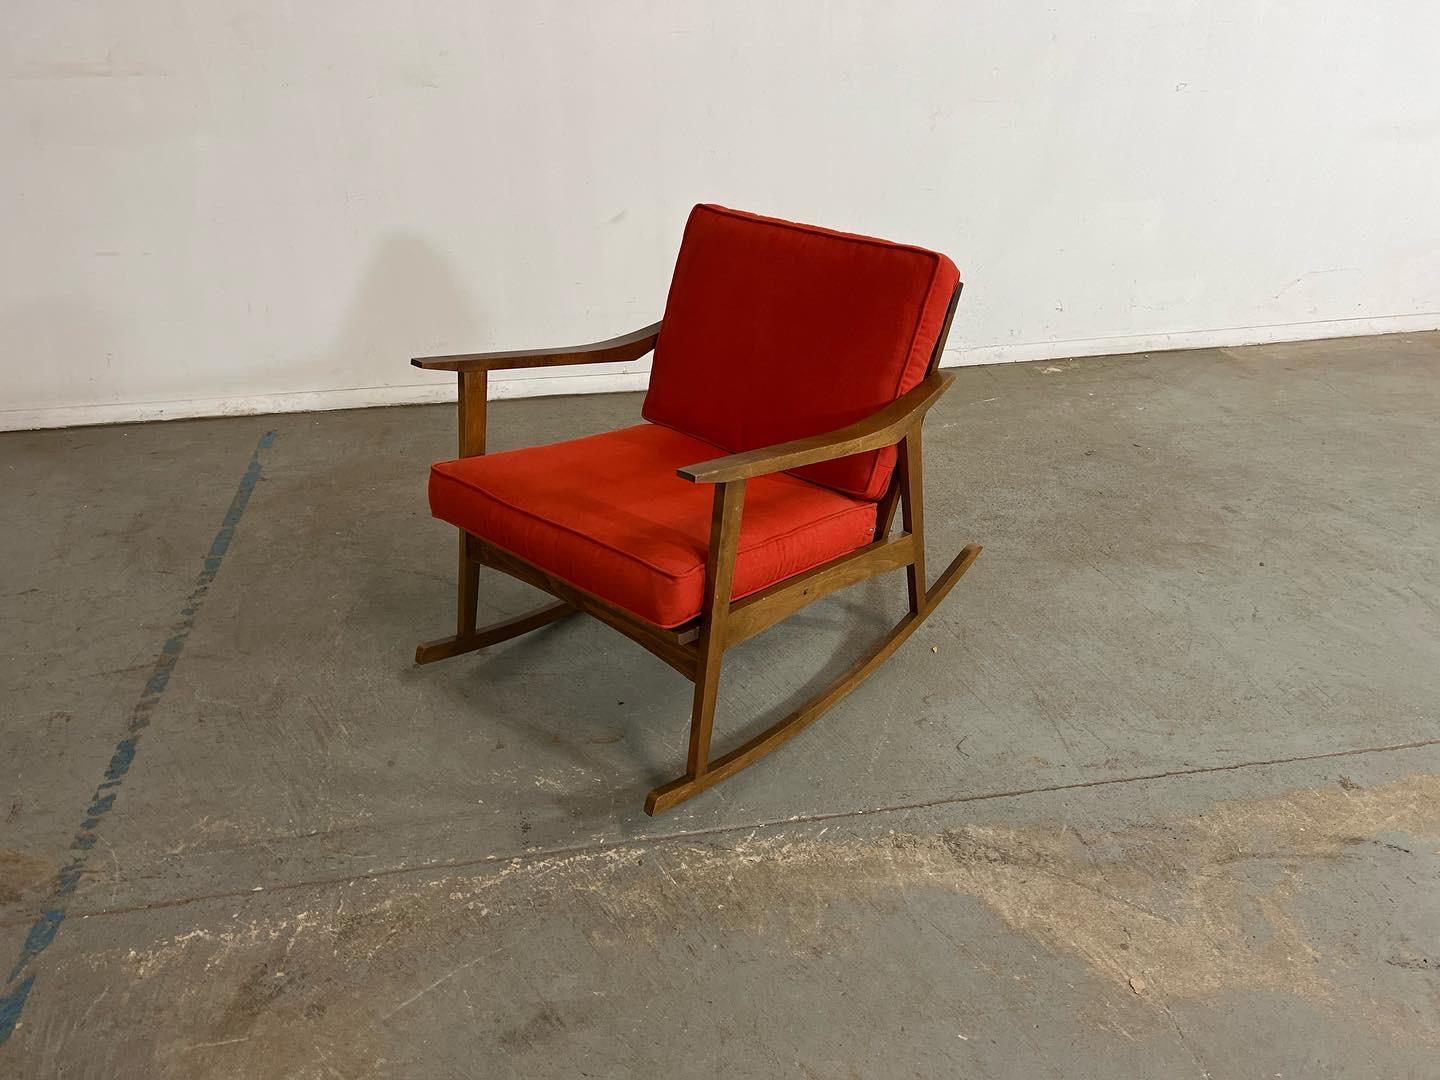 Mid-Century Modern walnut open arm rocking / lounge chair.

Offered is a mid-century modern open arm rocking / lounge chair. This piece is made of walnut and has been upholstered with textured Orange fabric. It is in good condition for its age